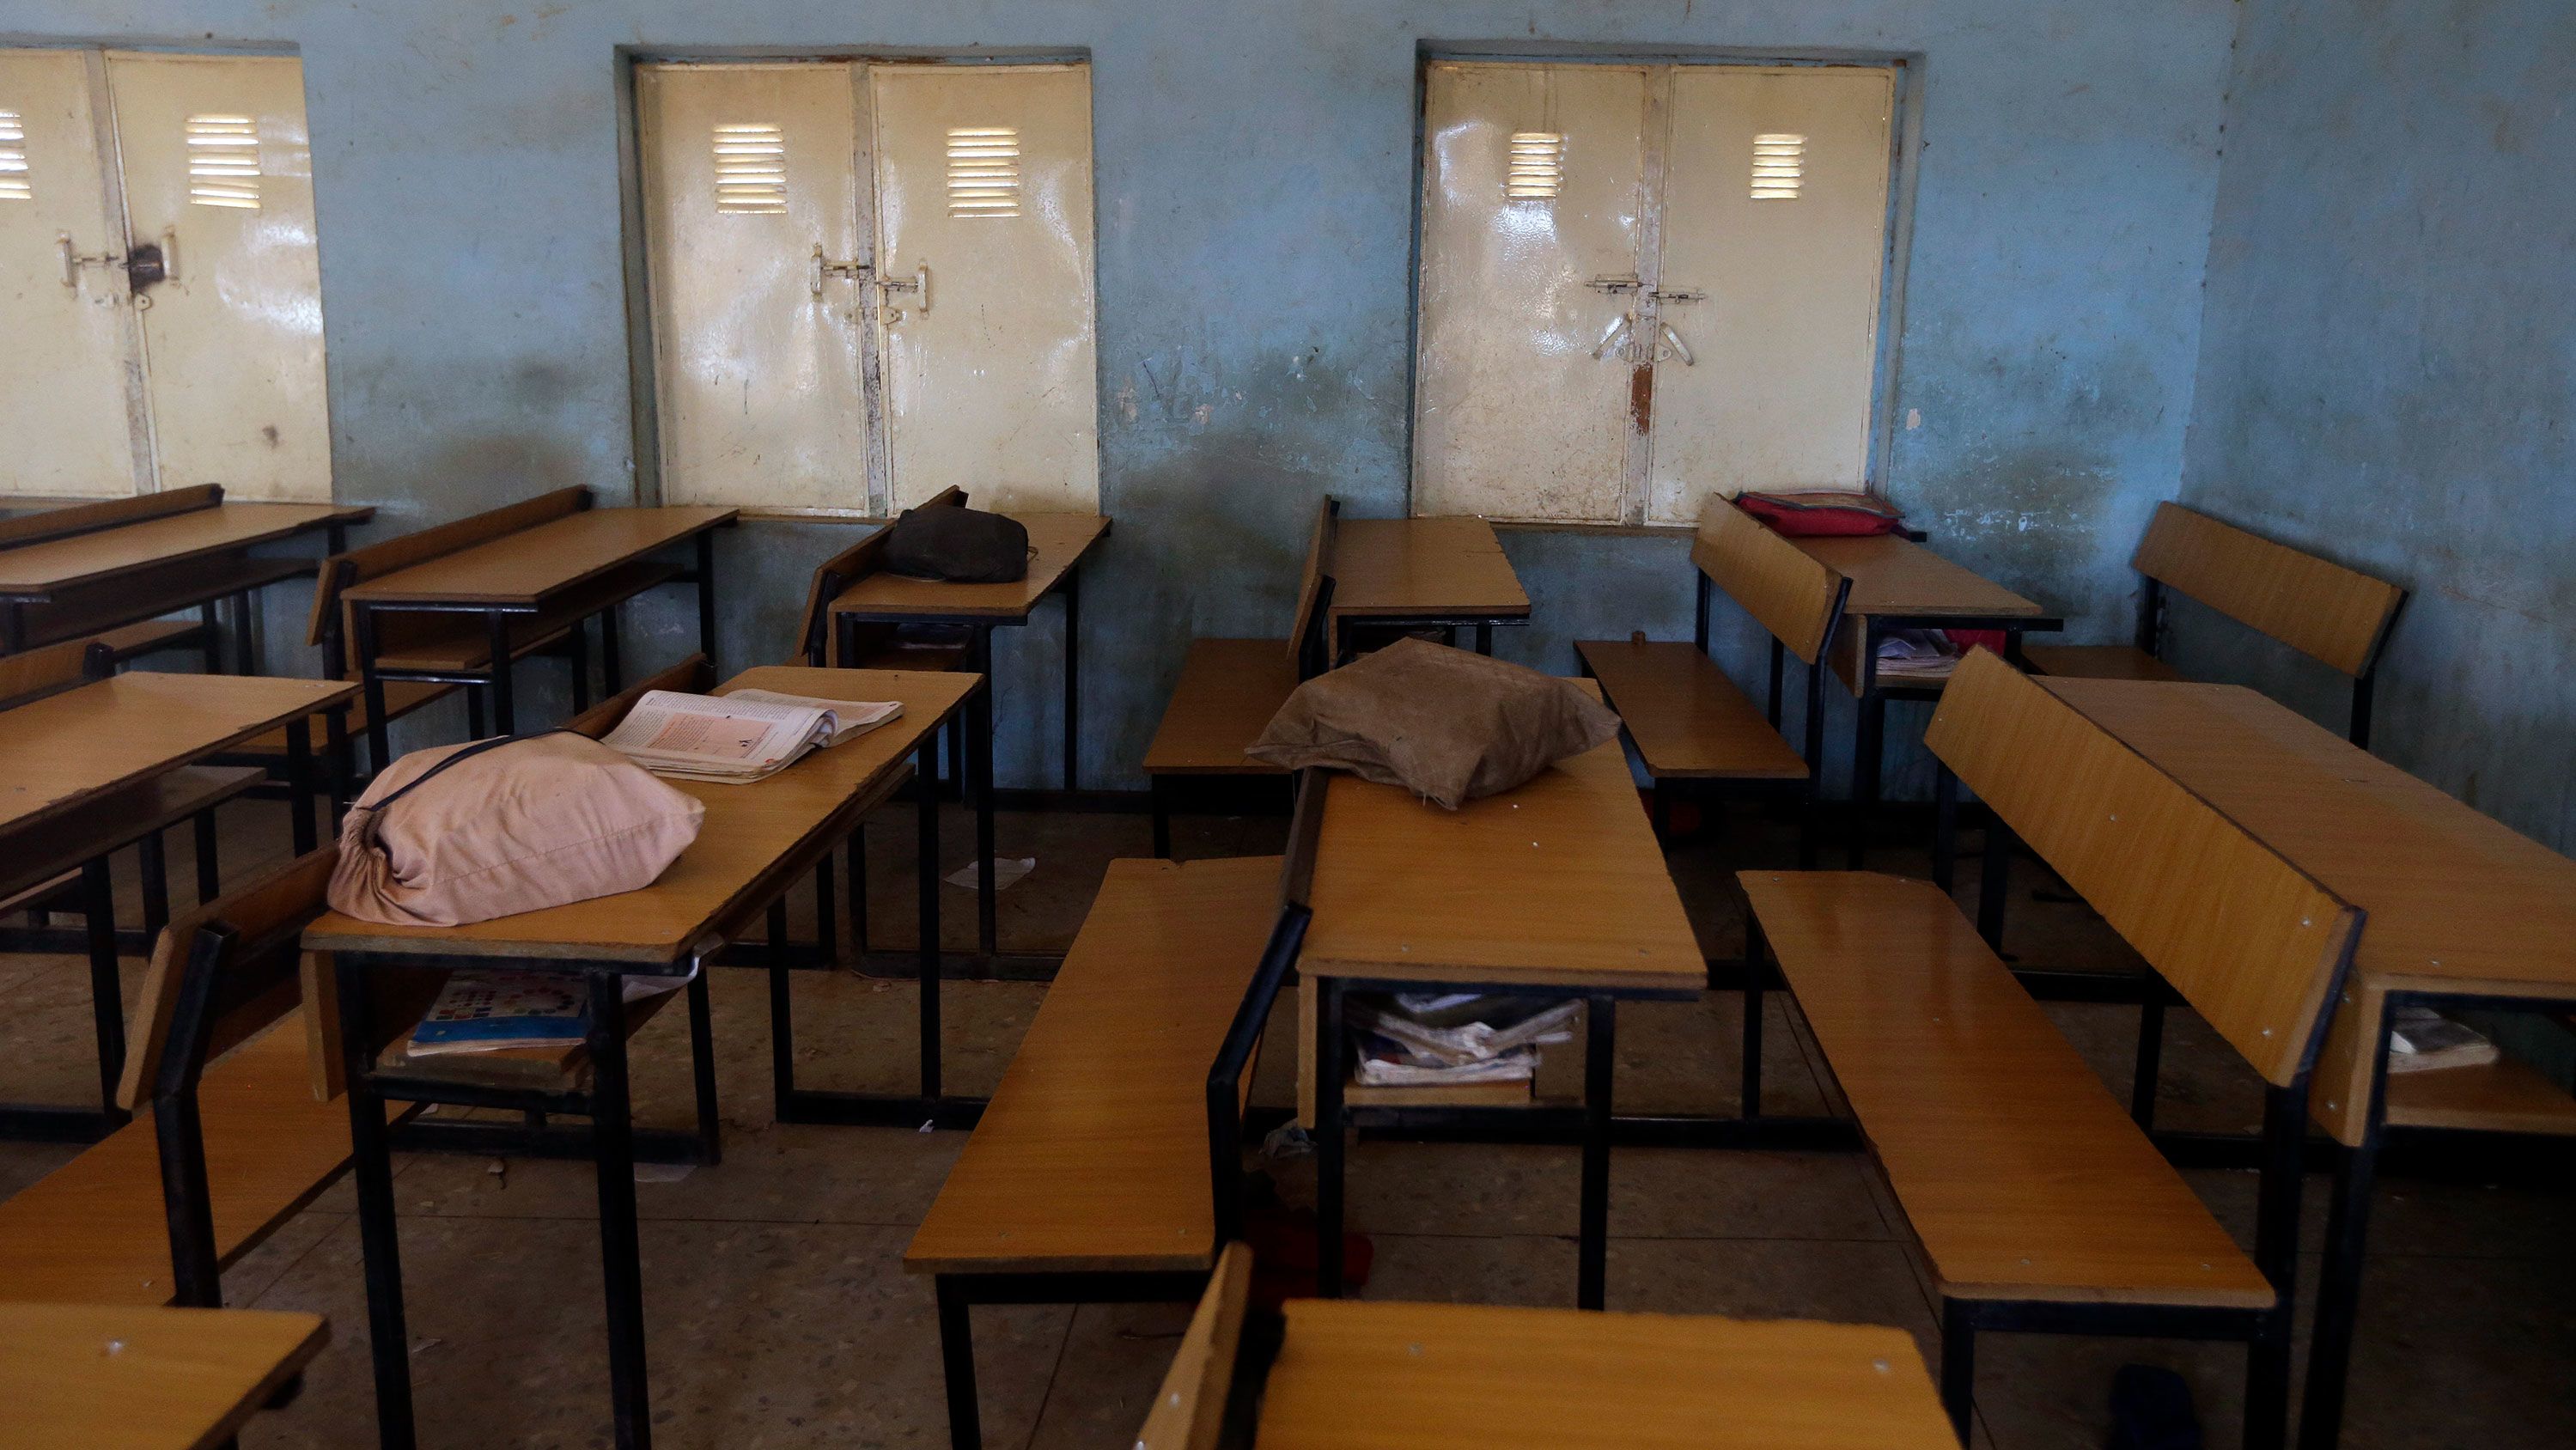 School bags of the kidnapped students are seen inside their classroom in Kankara, Nigeria on Wednesday, December 16, 2020.